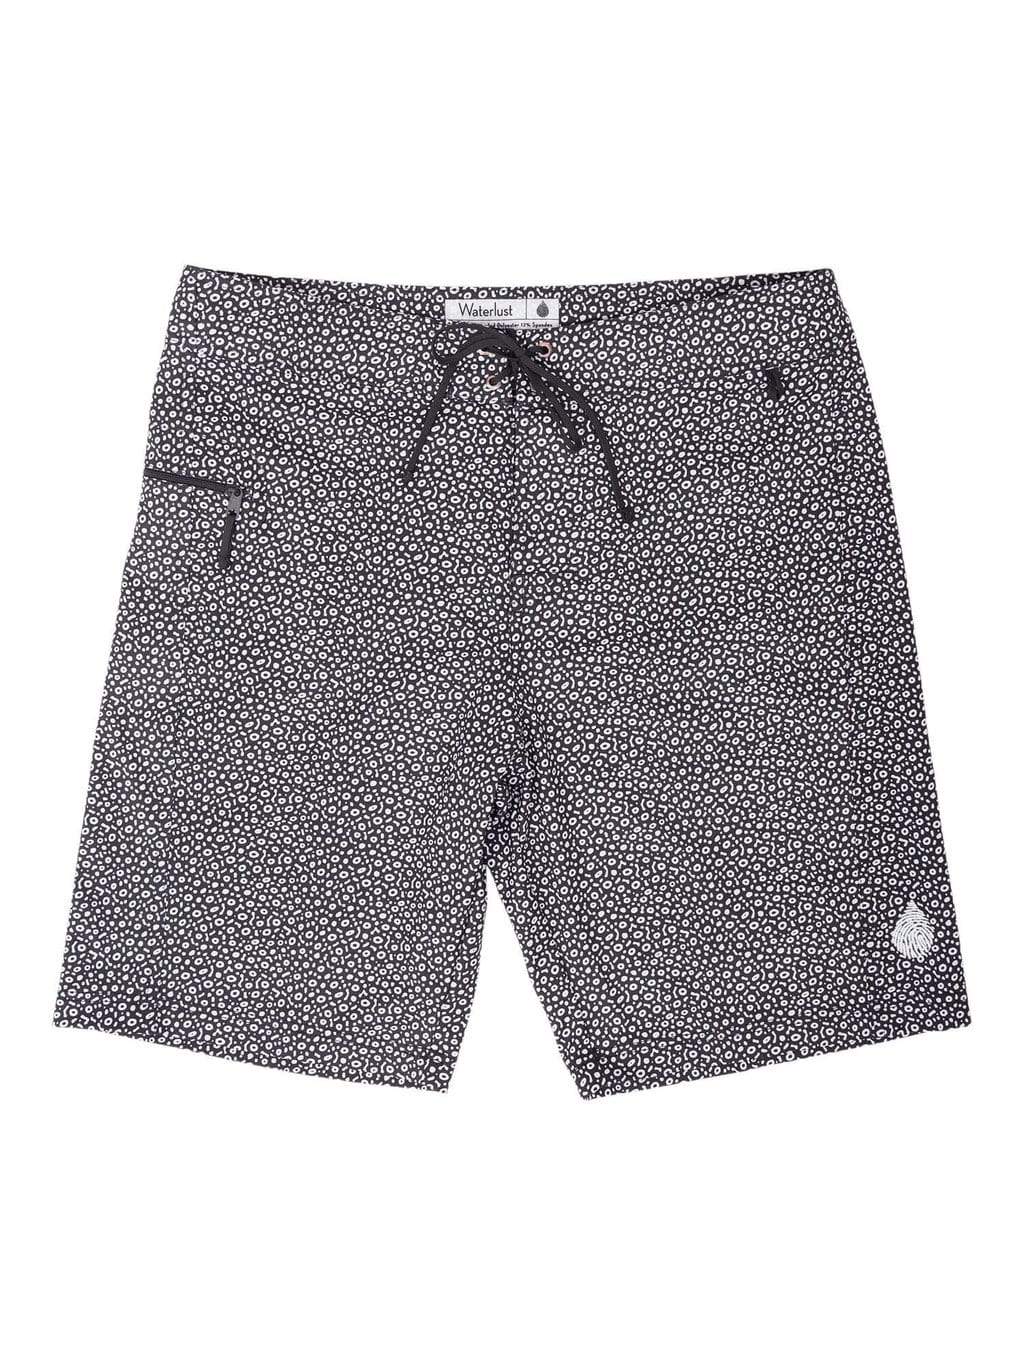 Spotted Eagle Ray Boardshorts - Waterlust